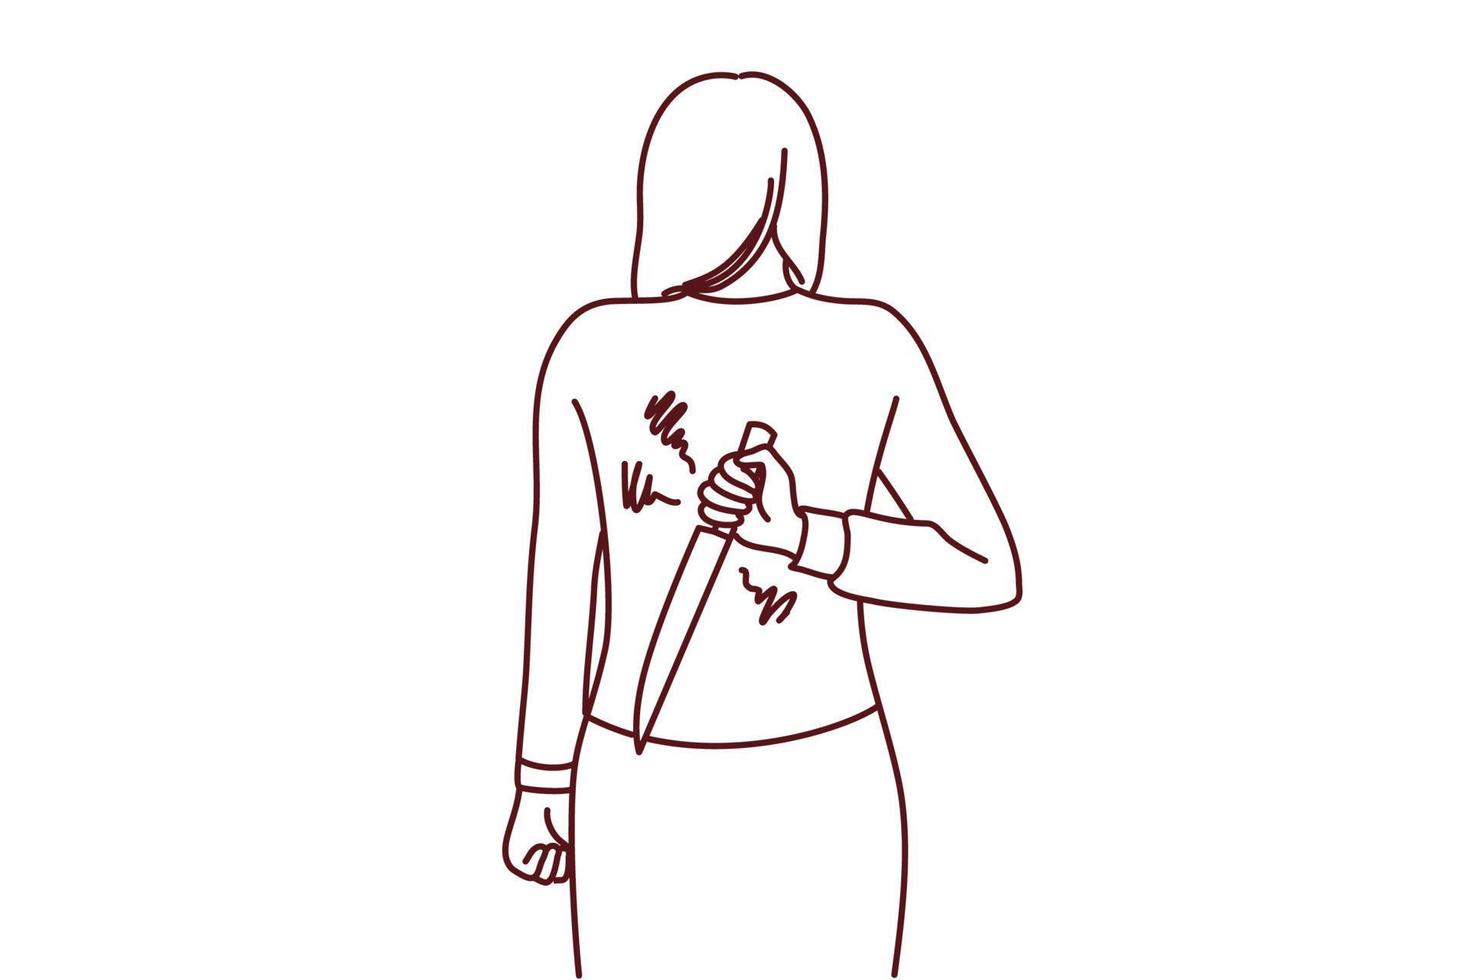 Woman hiding knife behind back ready to betray or attack. Businesswoman with weapon hidden. Risky deal or rivalry. Vector illustration.